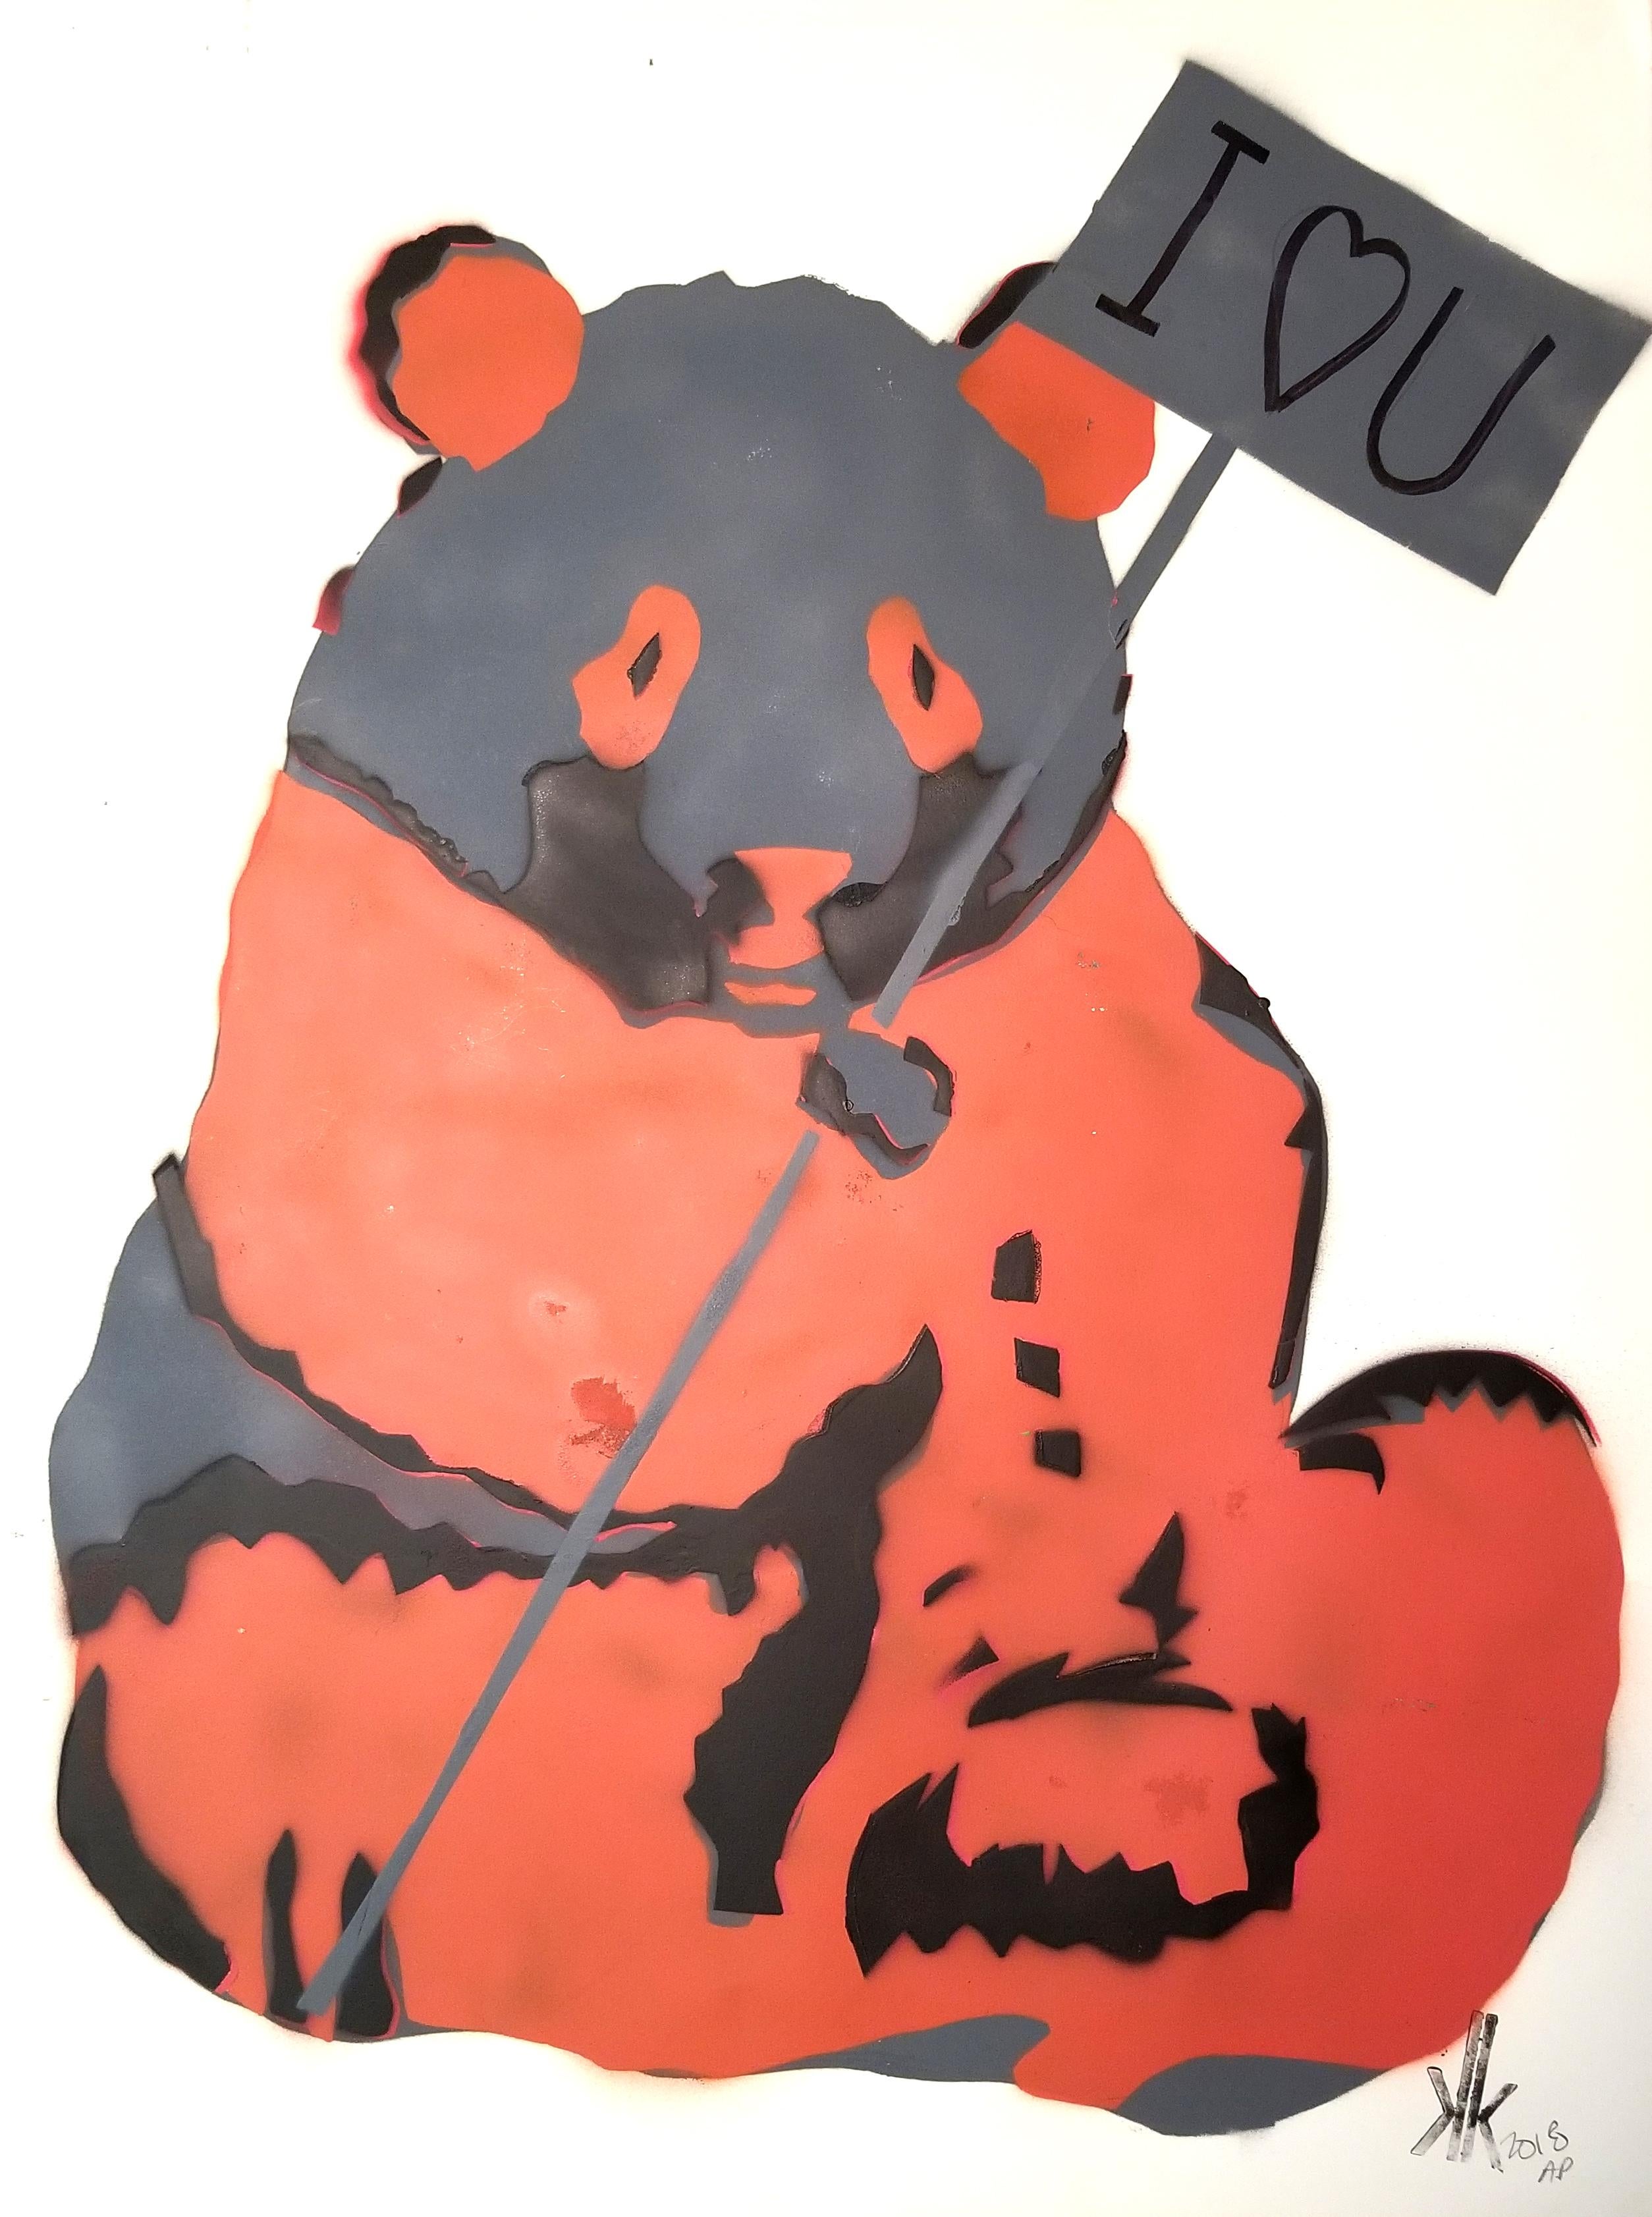 PANDA: We All Have A Voice - Orange Animal Painting by K.K.